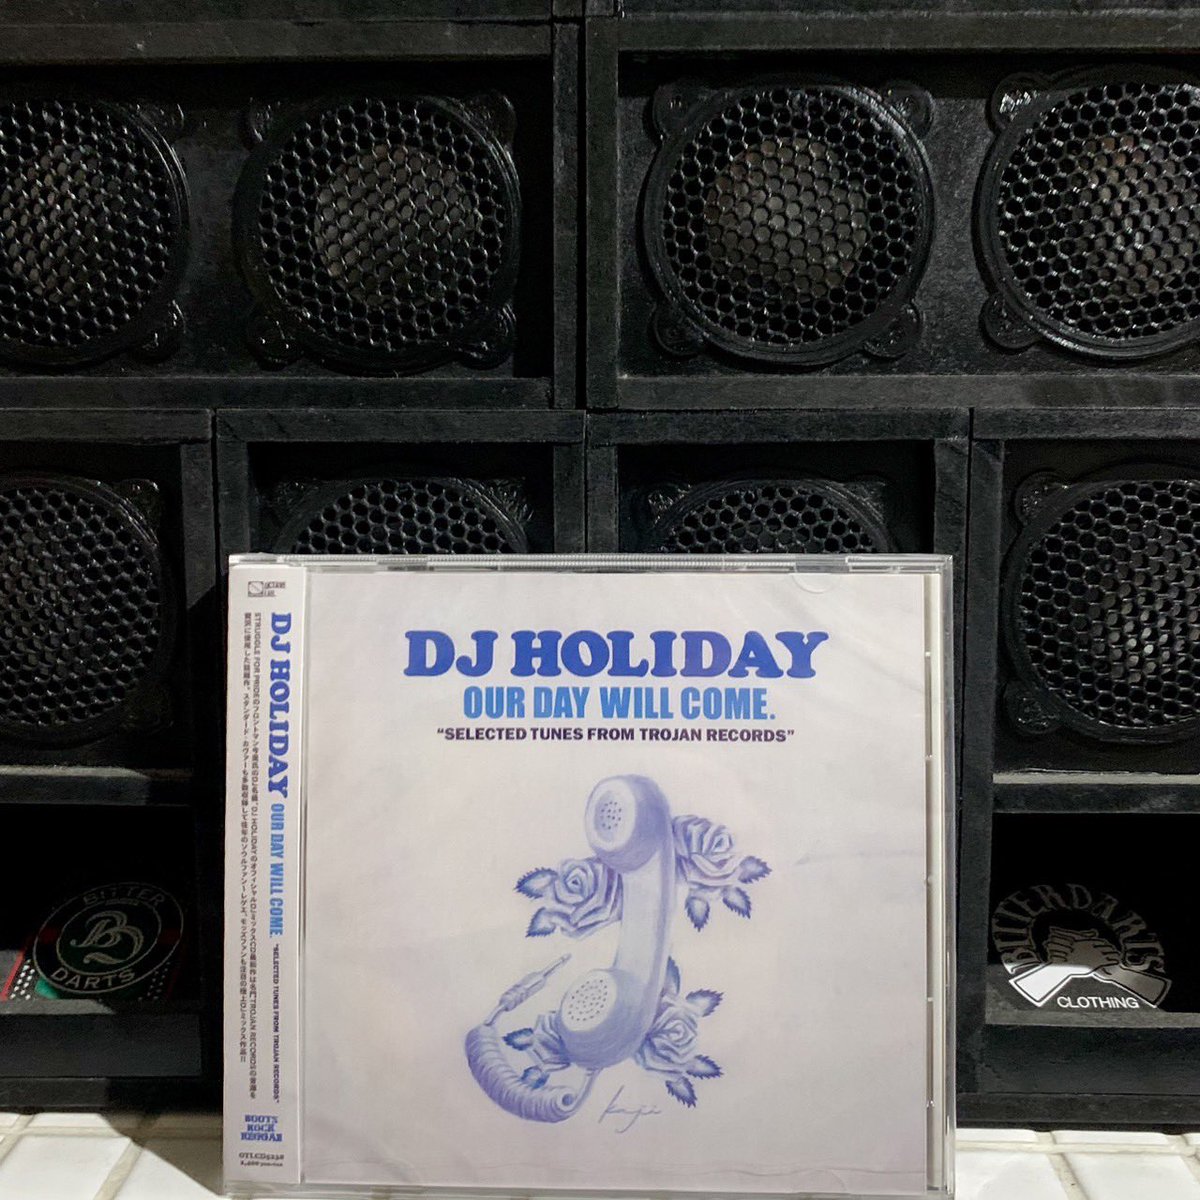 Now playing💿🎶
『OUR DAY WILL COME “SELECTED TUNES FROM TROJAN RECORDS”』
MIXED by DJ HOLIDAY A.K.A 今里 from STRUGGLE FOR PRIDE

BITTER DARTS
bitterdarts.com/shouhin/MixCD-…

#mixcd #djholidayakaimazato #struggleforpride #trojan #reggae #rocksteady #レコードのある店 #青森レコード